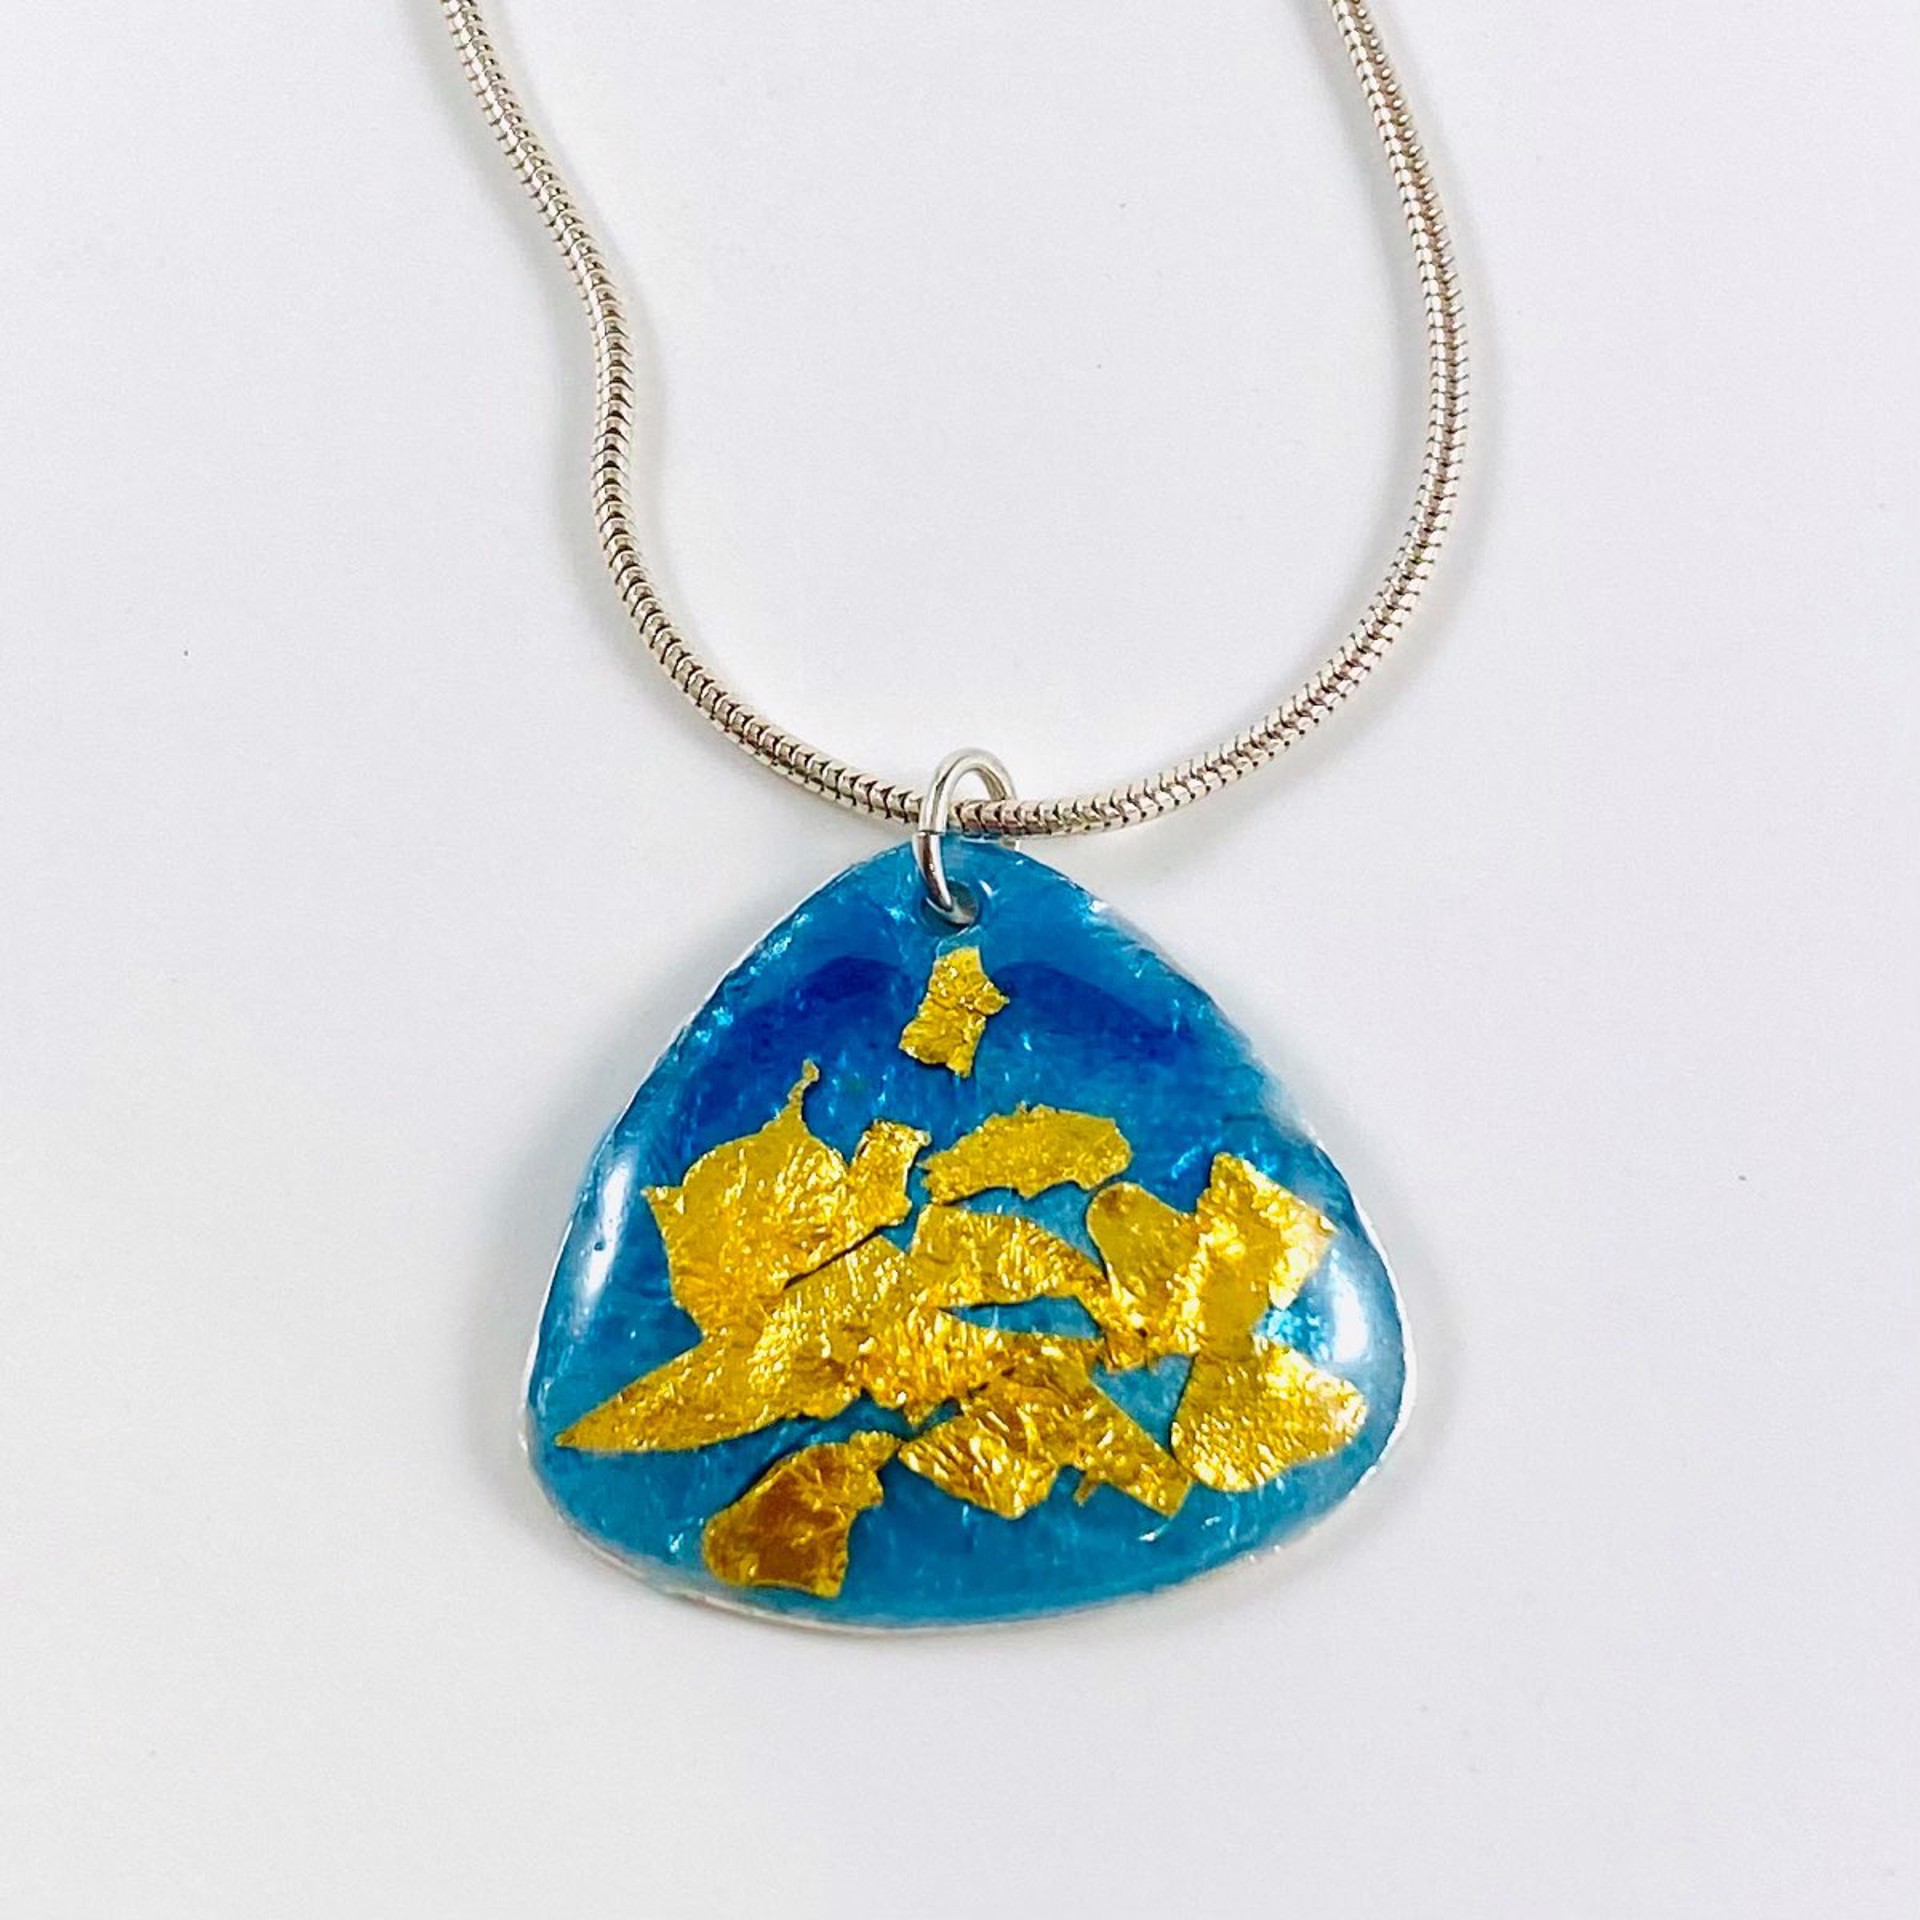 Rounded Triangle  Blue and Gold Vitreous Enamel Pendant 18"Snake Chain KH22-23 by Karen Hakim